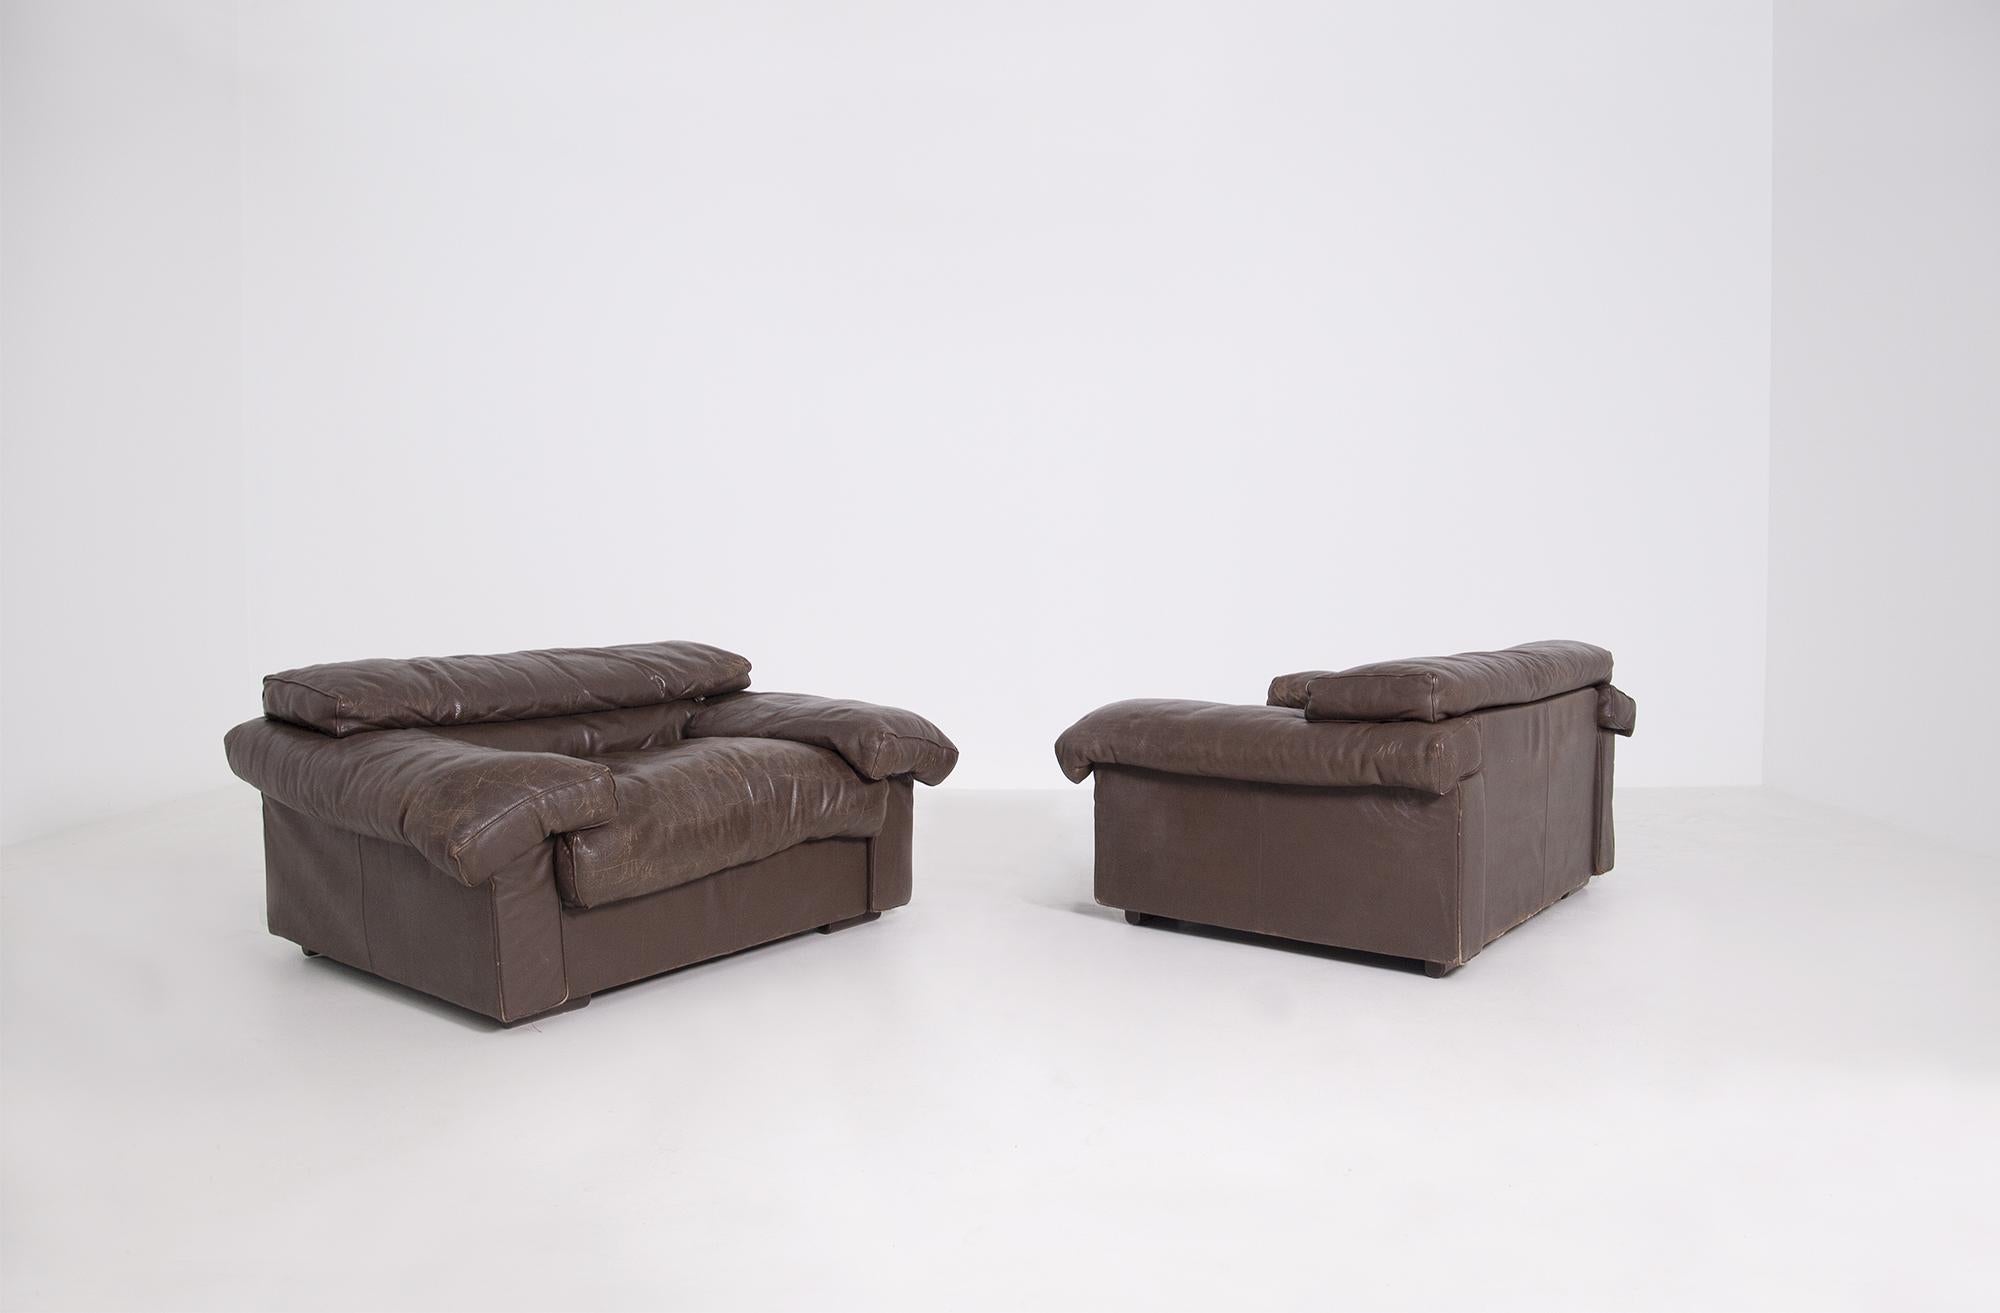 Elegant and modern pair of large armchairs designed by Tobia Scarpa for the B&B Italia manufacture in 1973. The pair of armchairs is upholstered in a beautiful brown leather. The armchairs are the Erasmo model with the original label of the